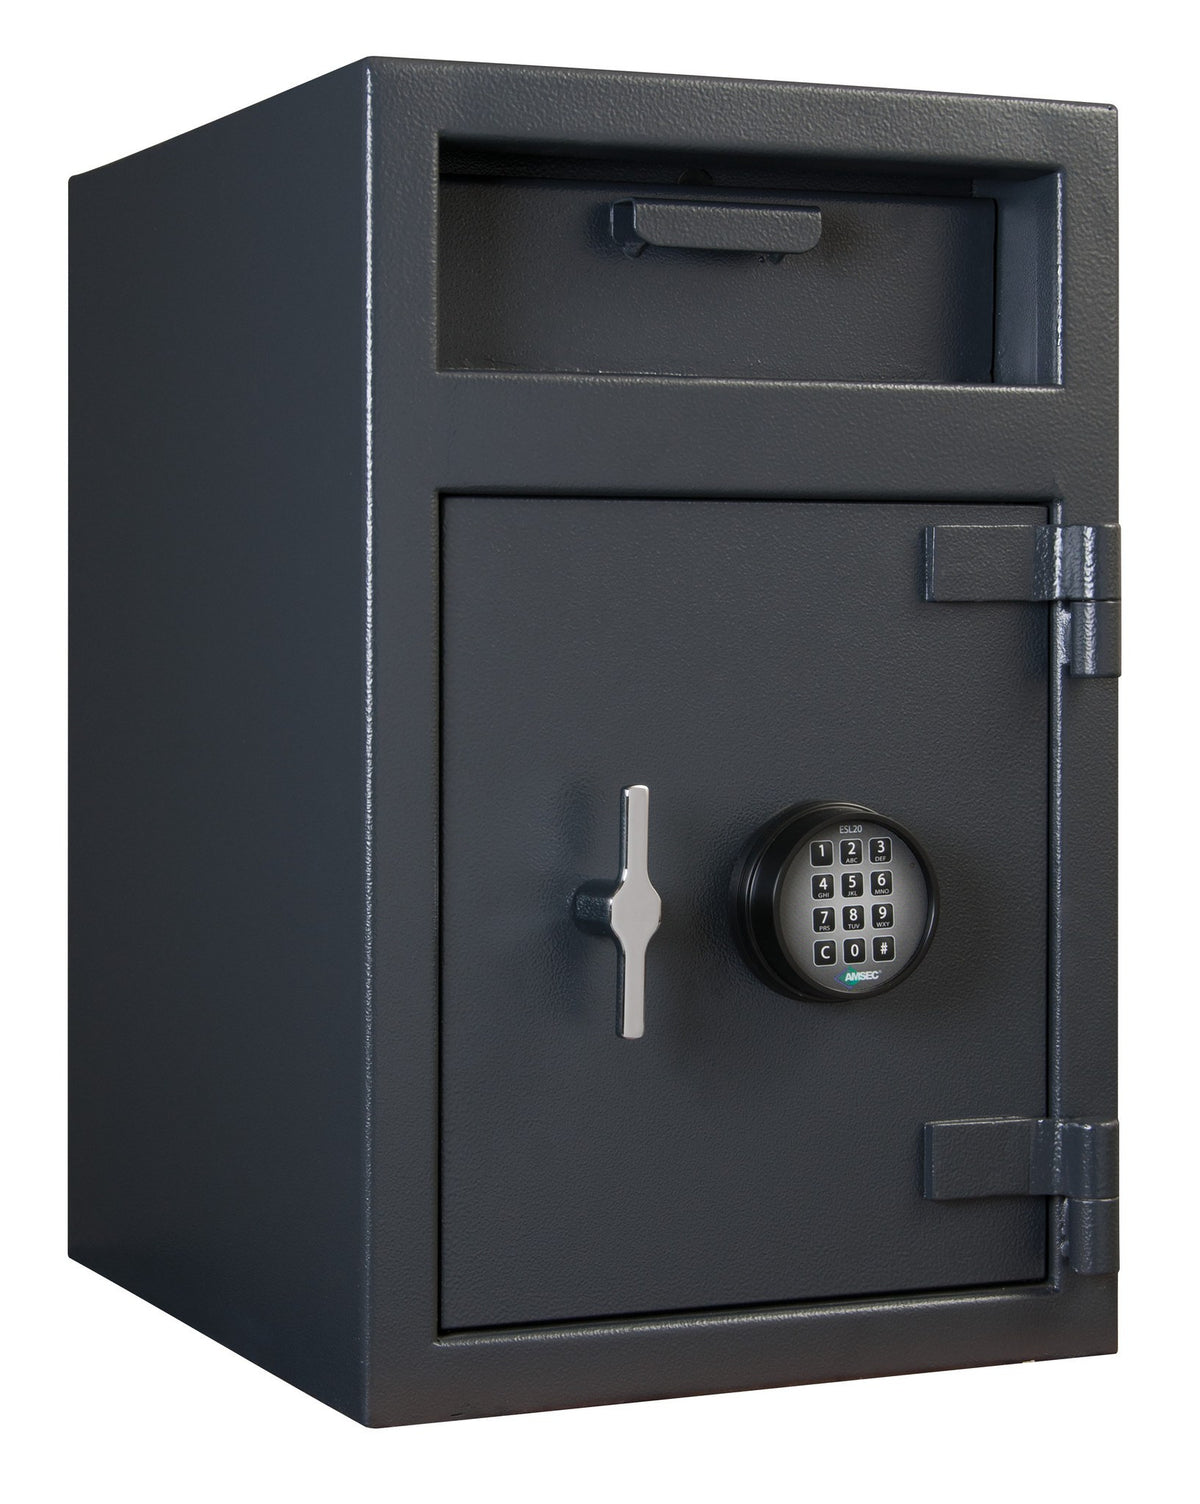 AMSEC DSF2516E2 Front Loading Till Storage Depository Safe